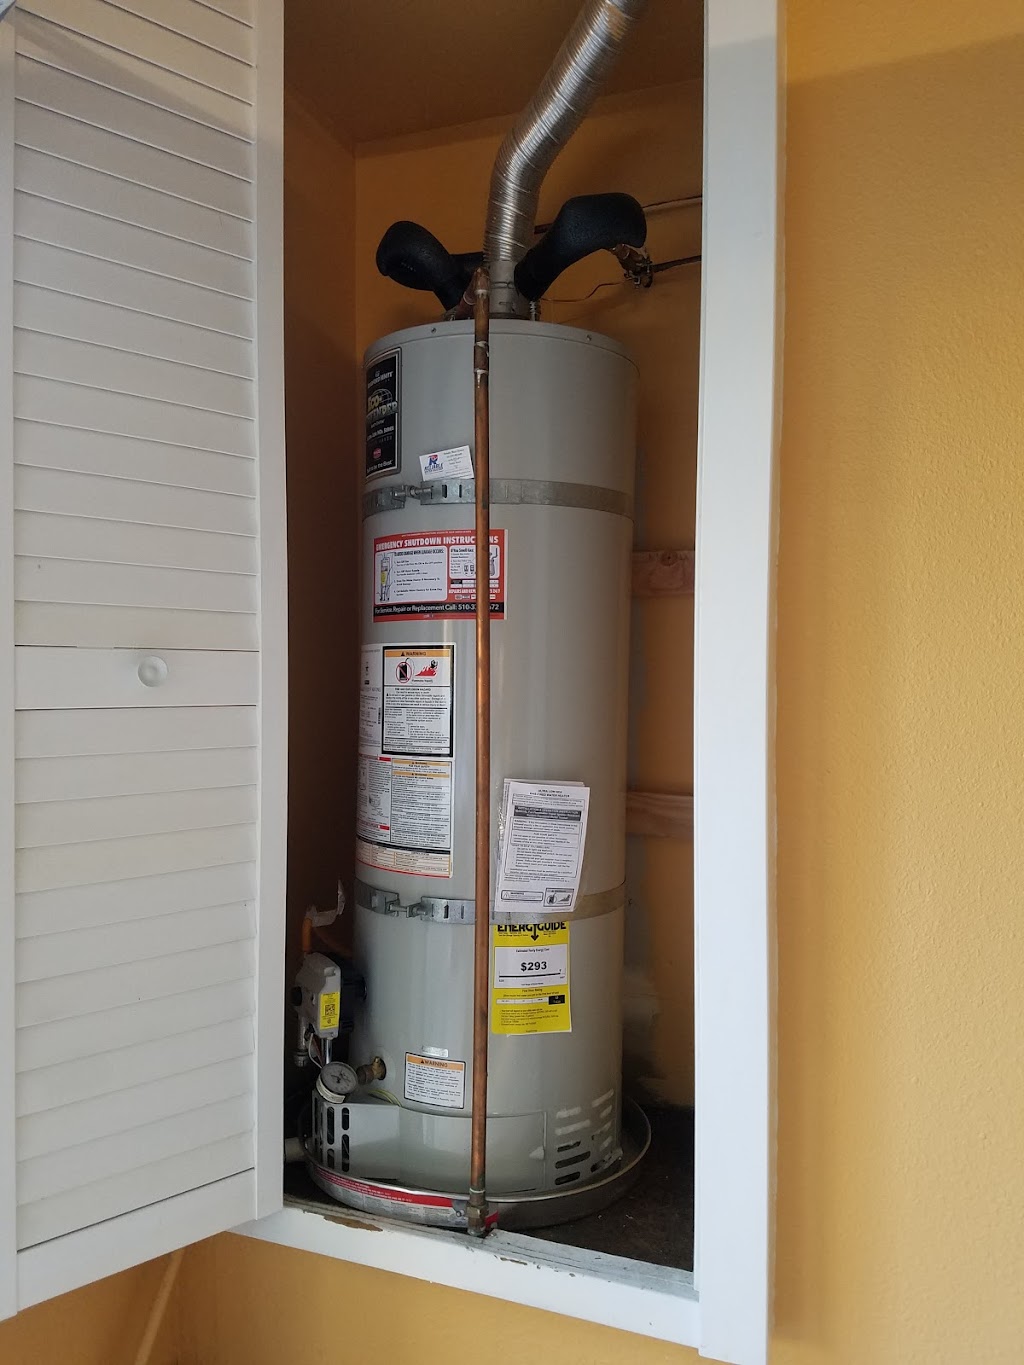 Reliable Water Heaters | 1351 Evergreen Dr, Concord, CA 94520 | Phone: (925) 812-4601